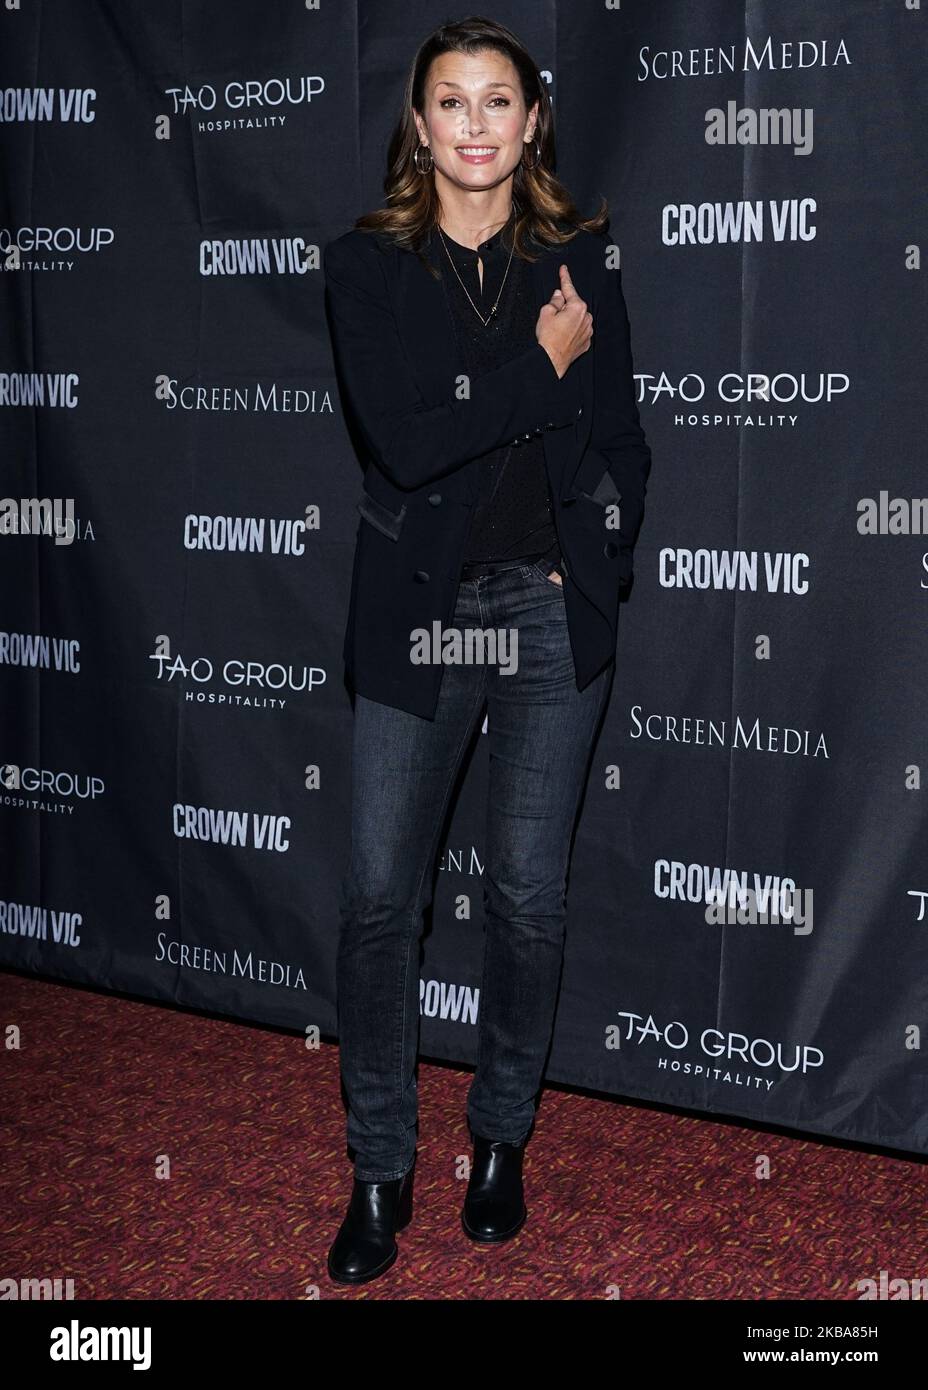 MANHATTAN, NEW YORK CITY, NEW YORK, USA - NOVEMBER 06: Actress Bridget Moynahan arrives at the New York Special Screening Of Screen Media Films' 'Crown Vic' held at the Village East Cinema on November 6, 2019 in Manhattan, New York City, New York, United States. (Photo by William Perez/Image Press Agency/NurPhoto) Stock Photo